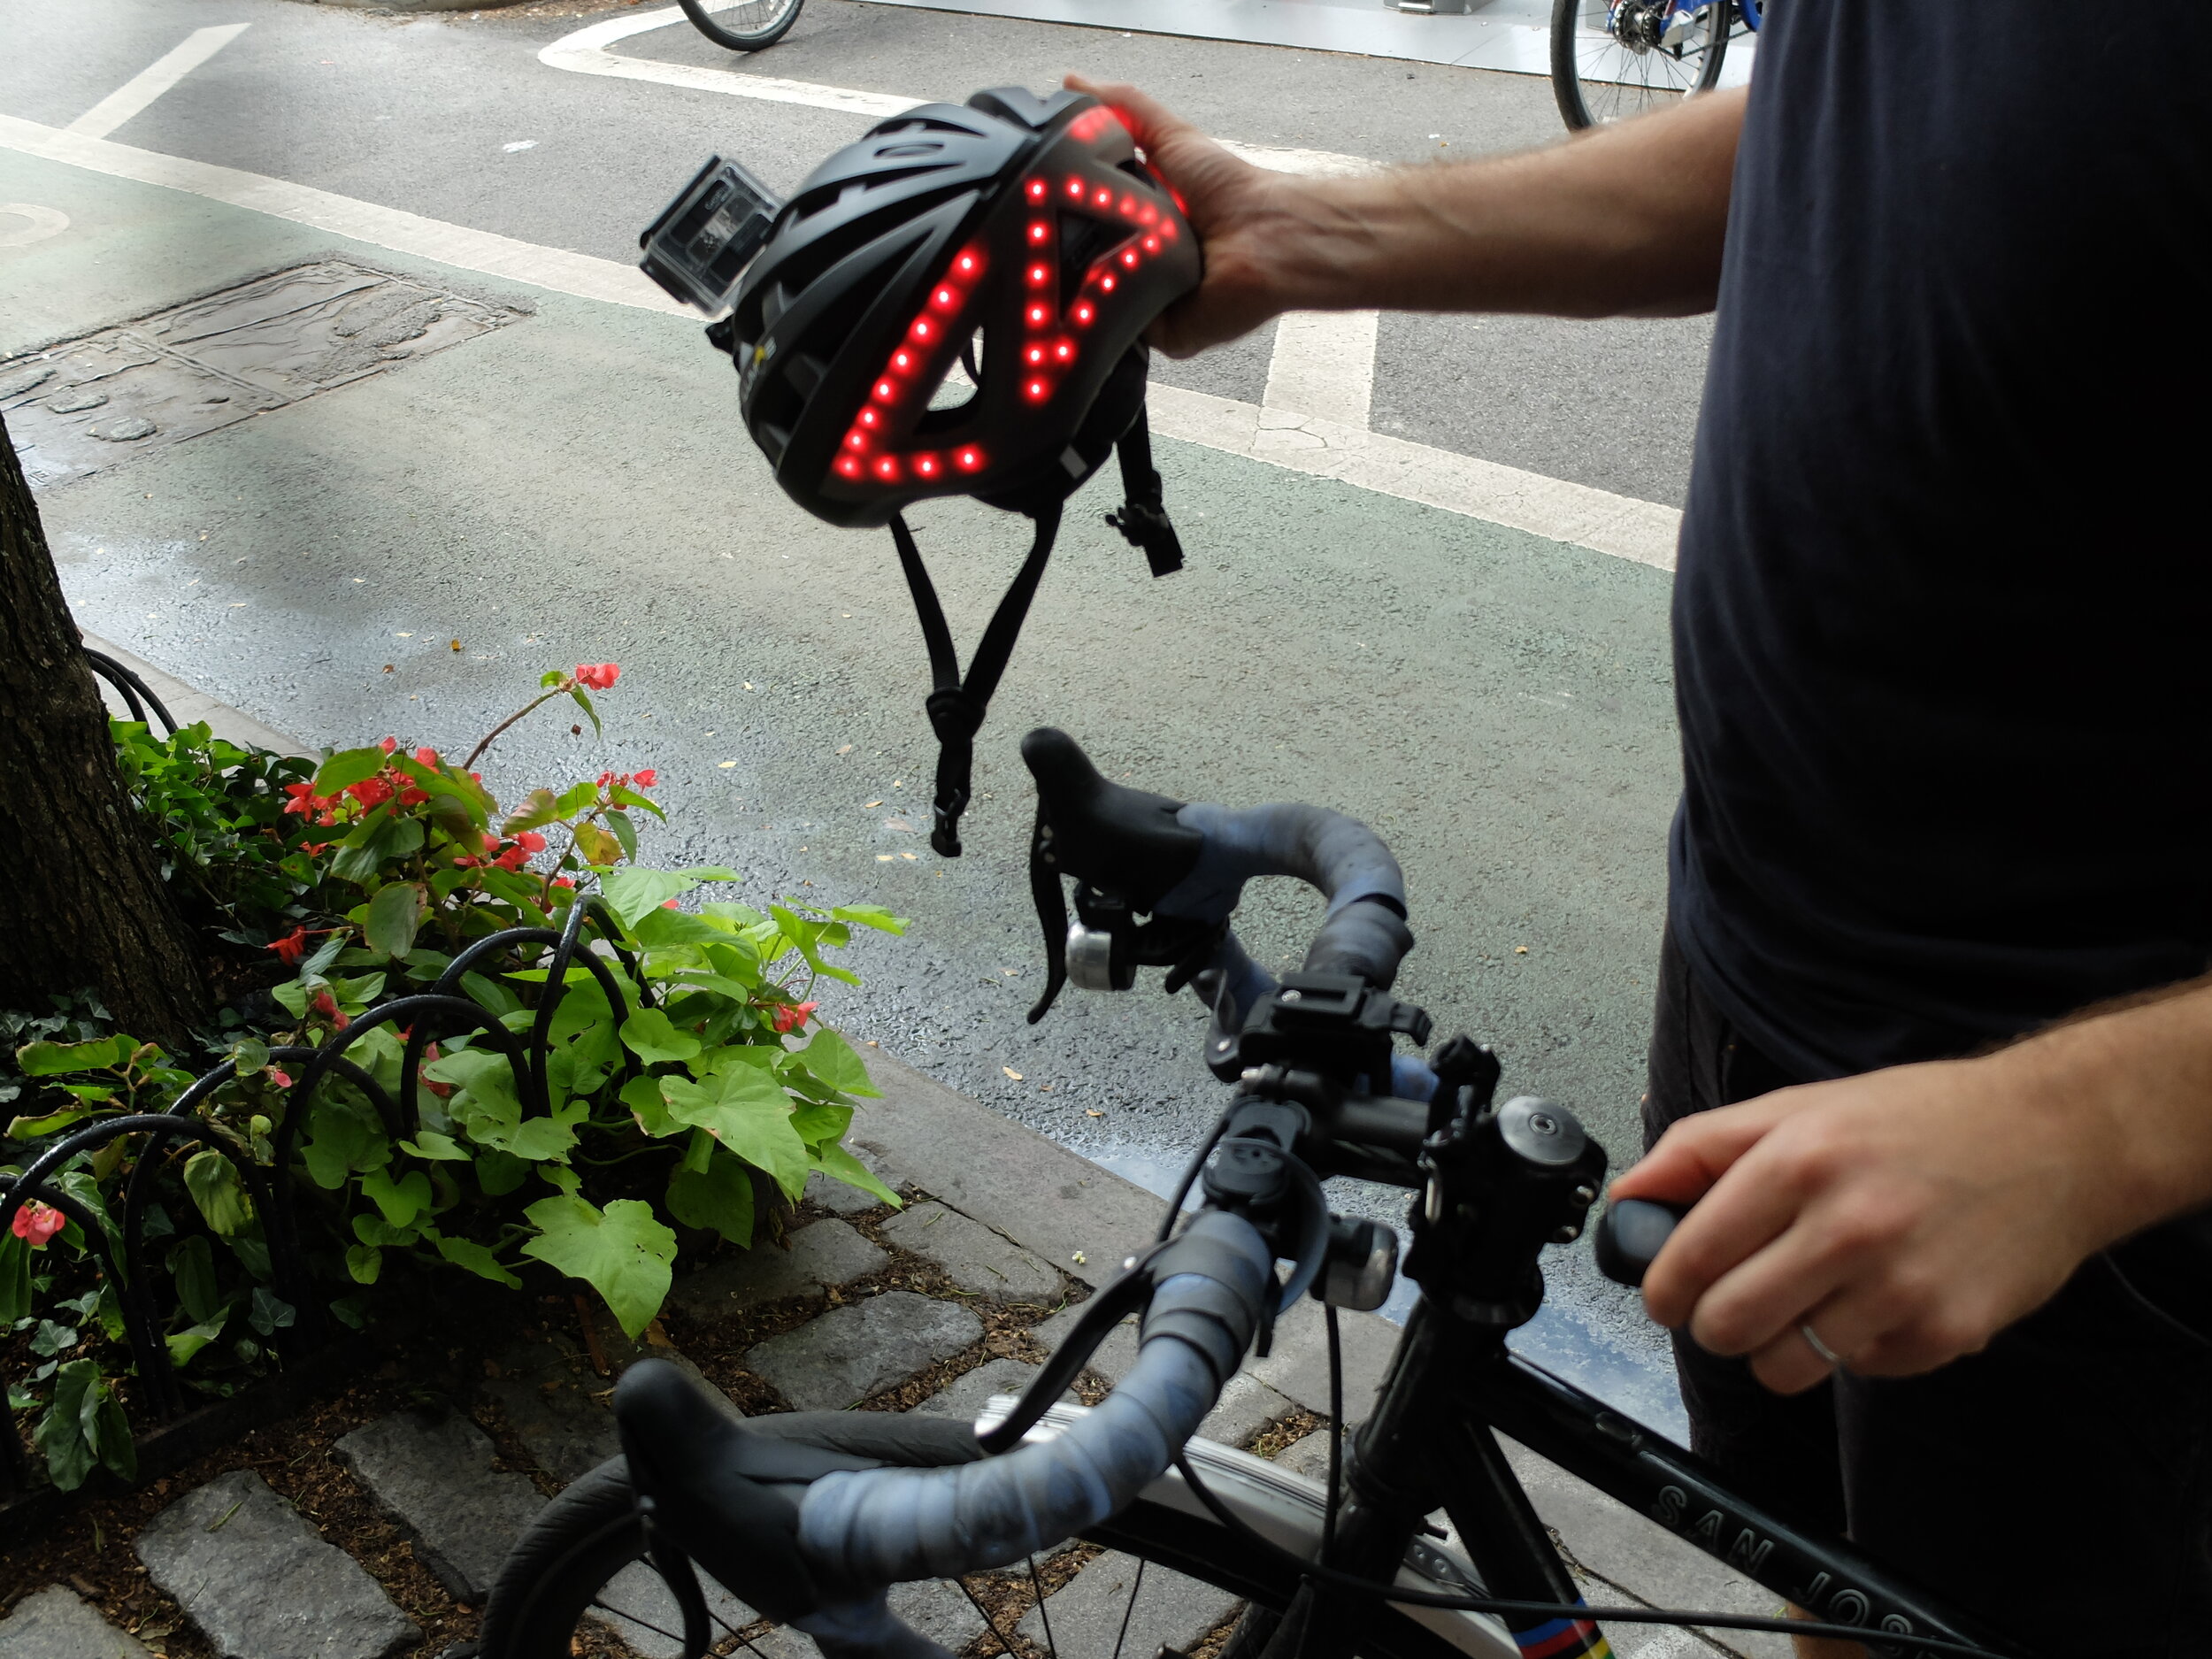 Nate, who bicycle commutes in N.Y.C. has this fancy helmet that allows vehicles to be aware of his intentions; turning, stopping...